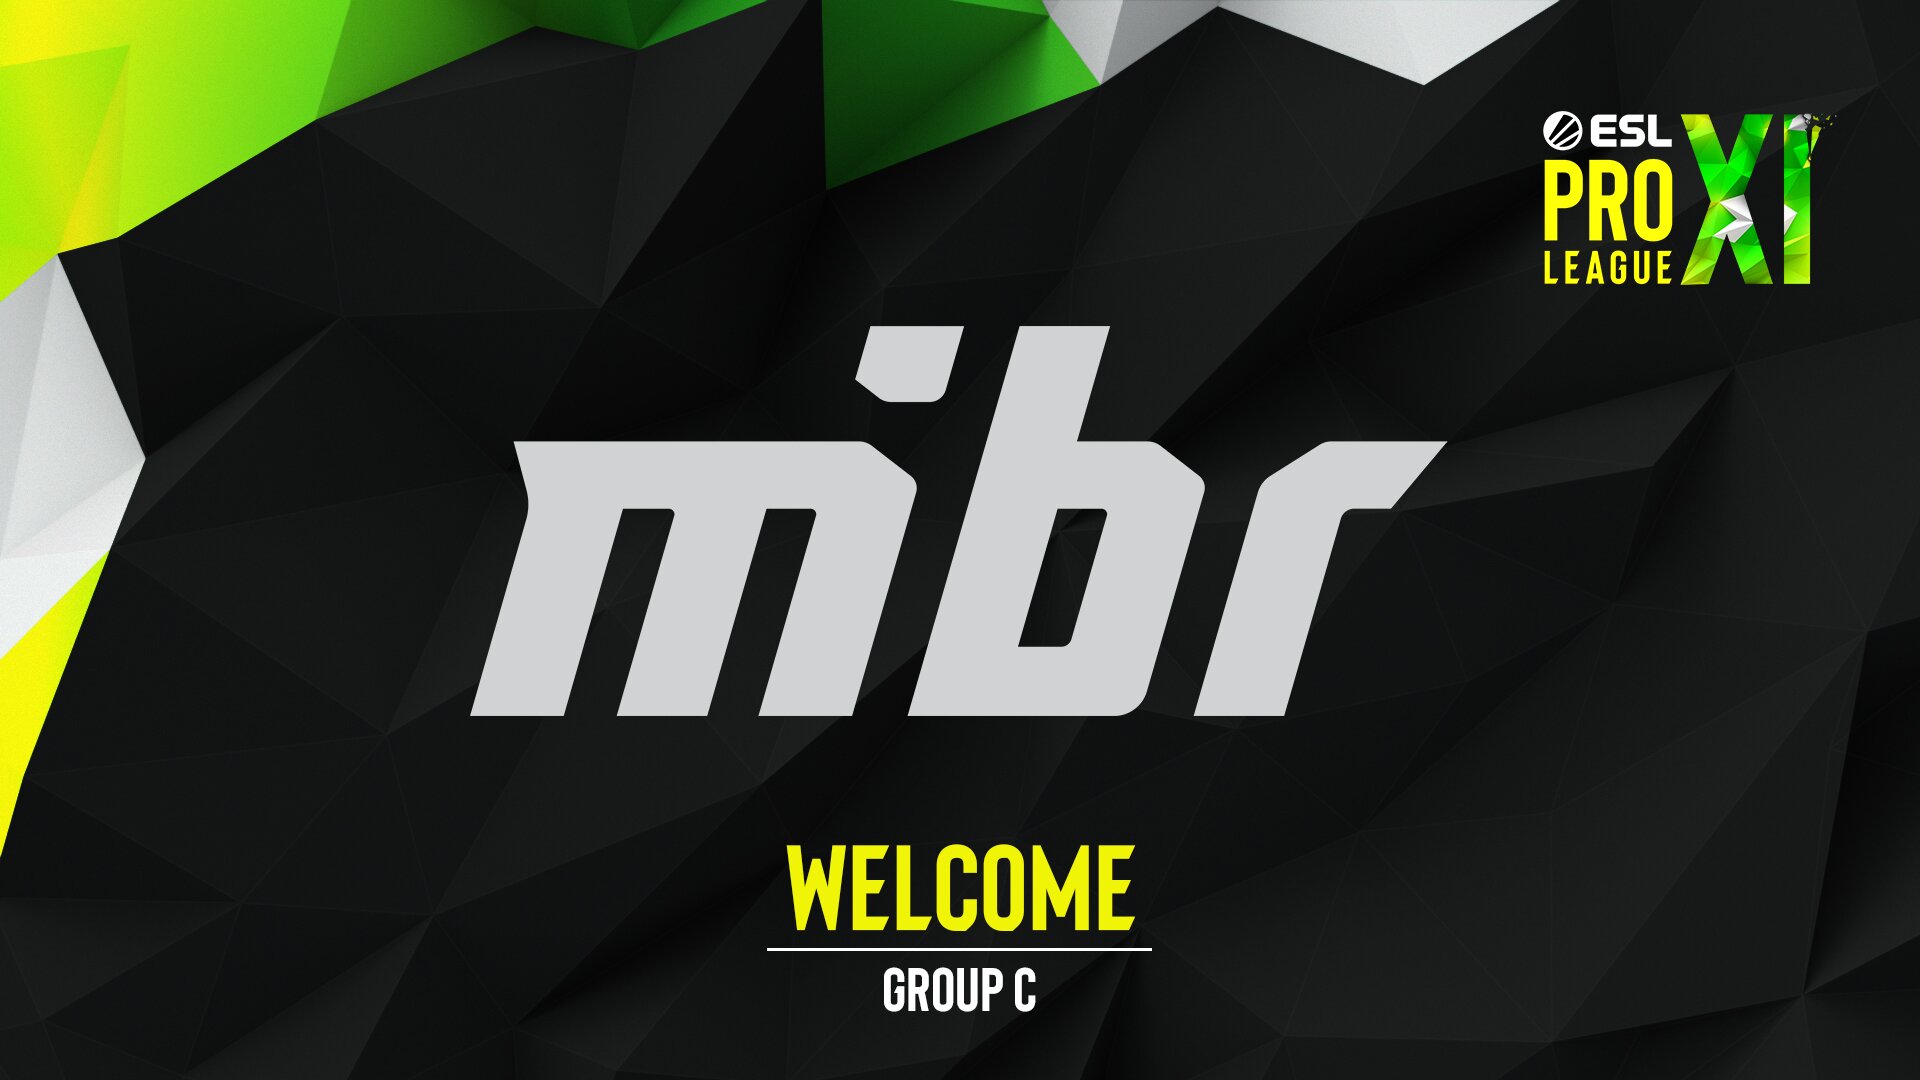 MiBR will be replacing Sharks in Group C of Pro League Season 11 (Image via ESL)